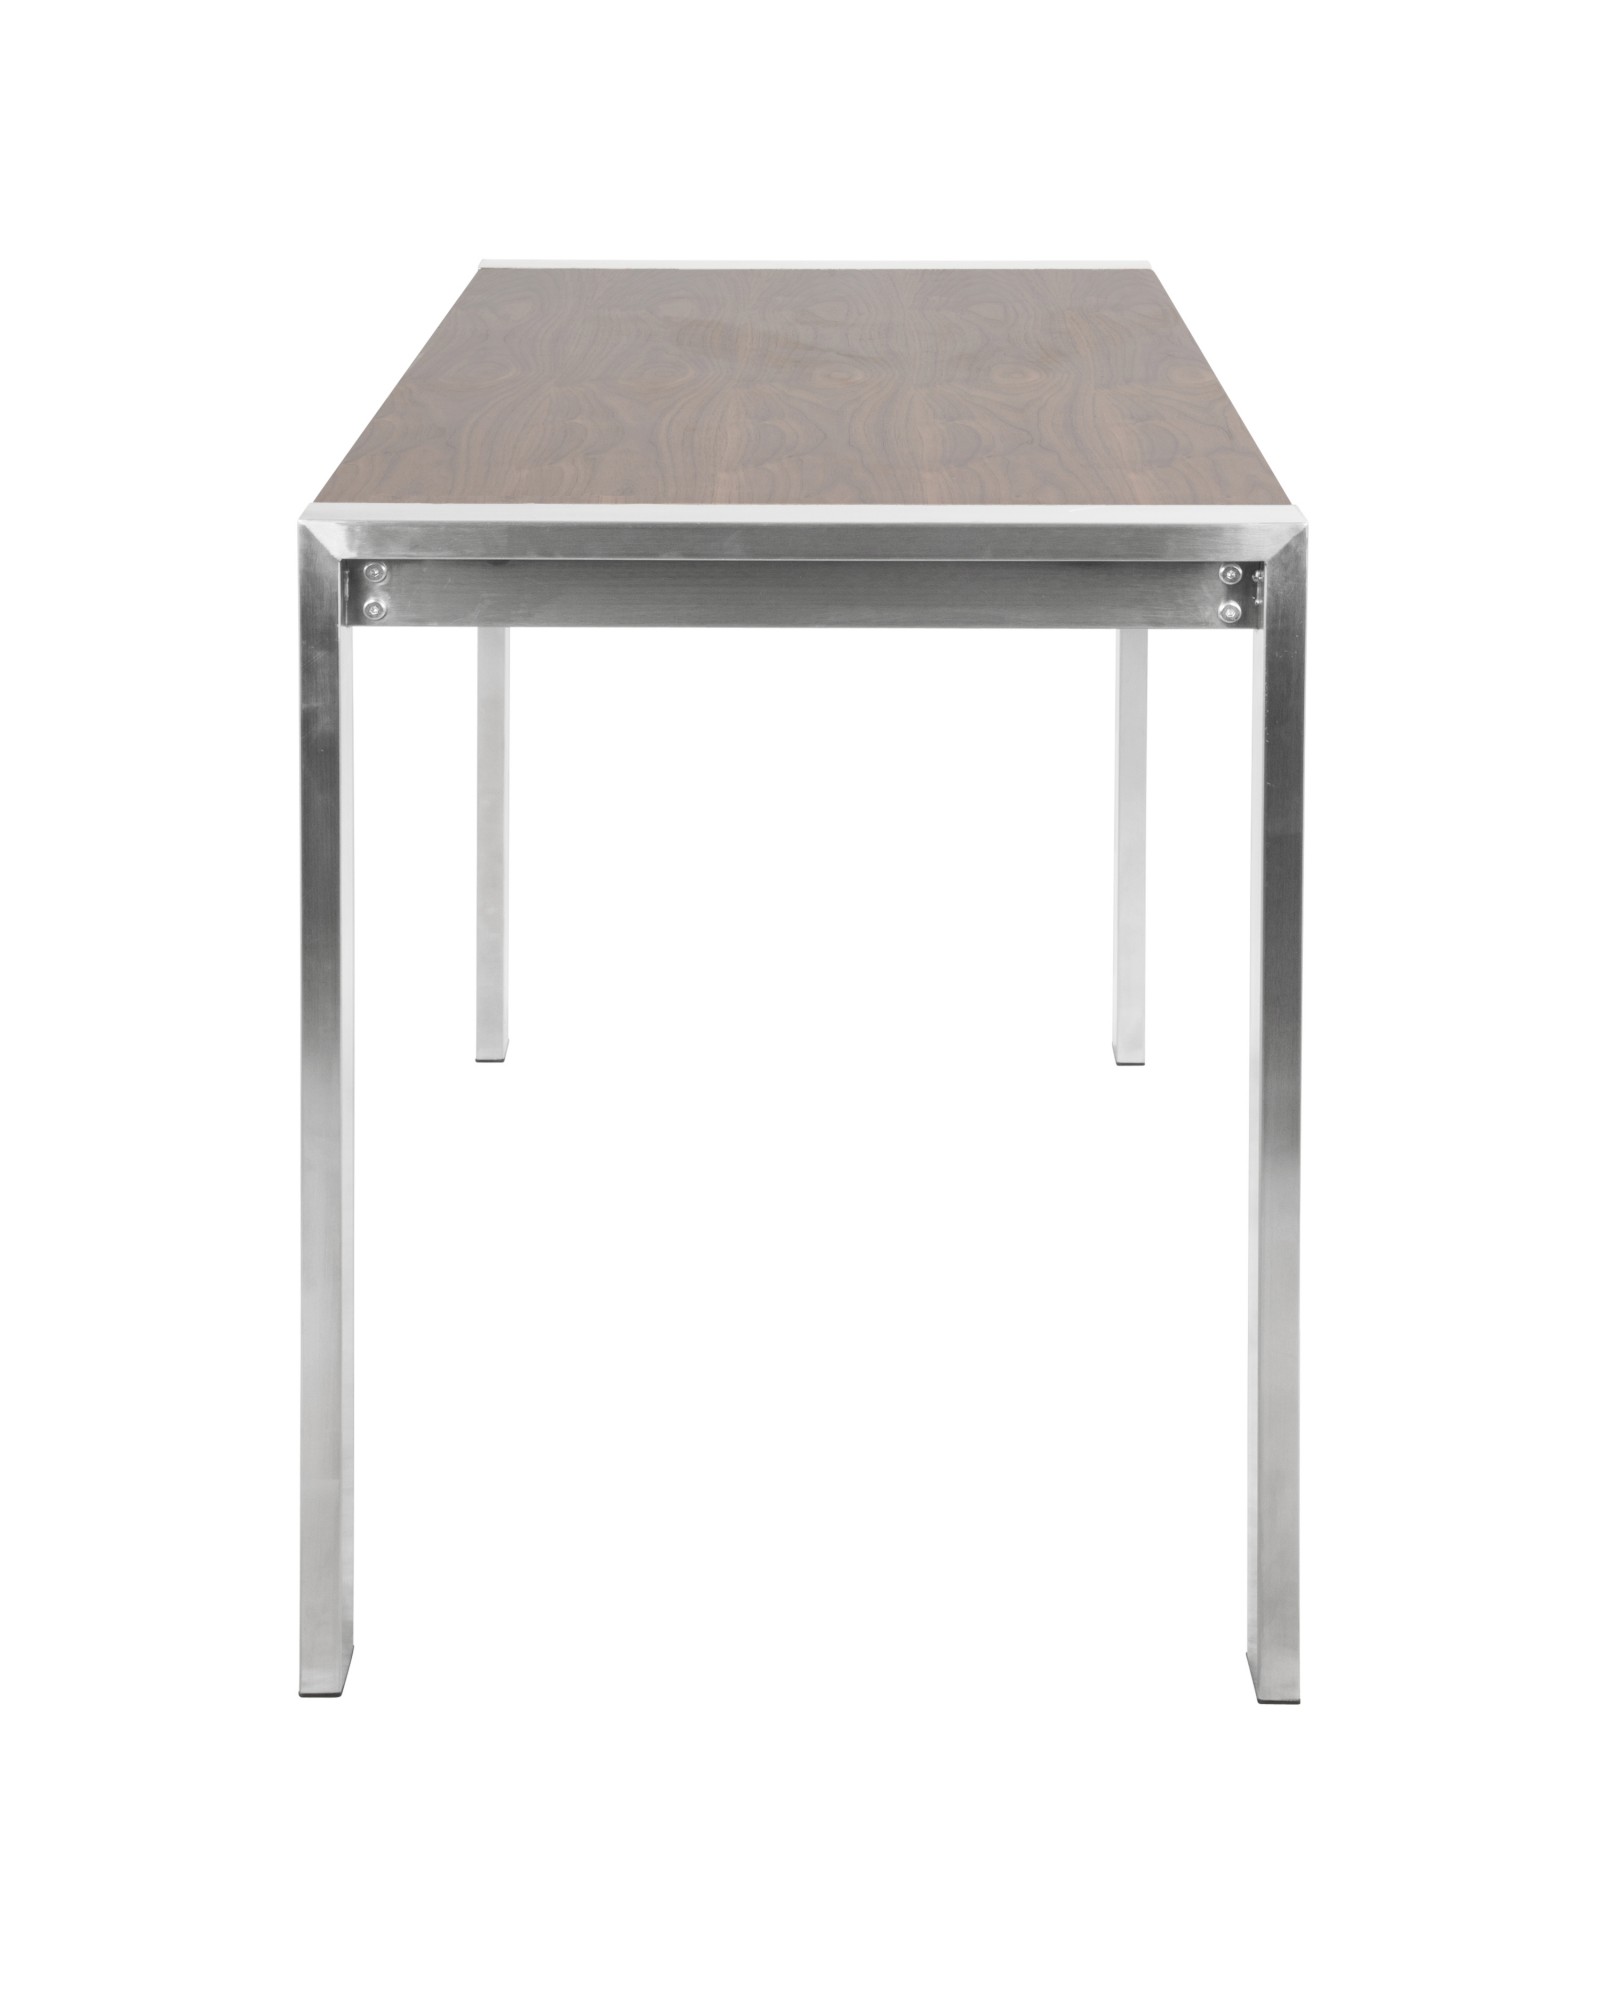 Fuji Contemporary Counter Table in Brushed Stainless Steel and Walnut Wood